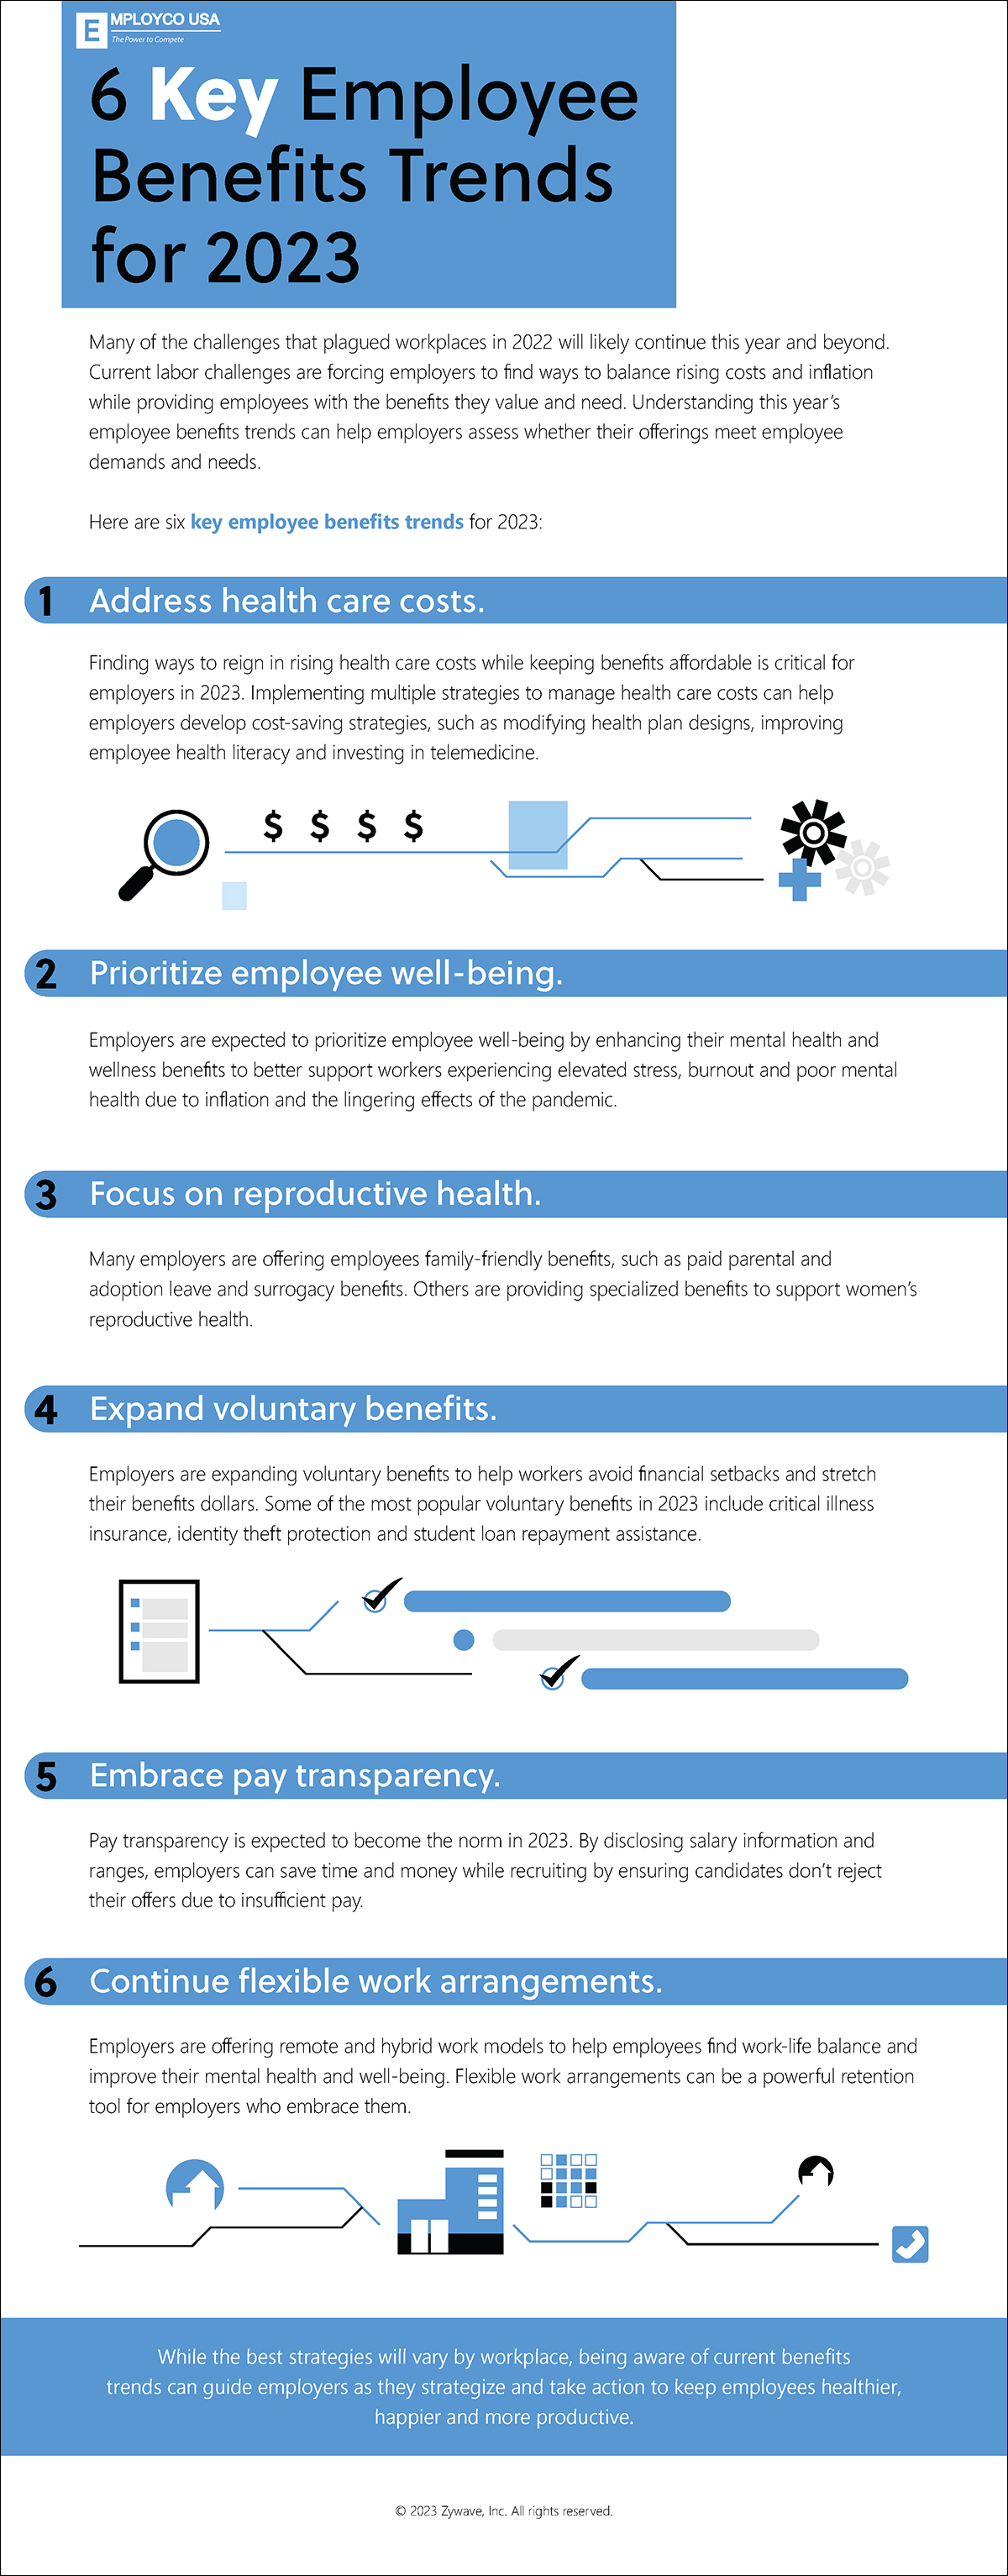 6 Key Employee Benefits Trends for 2023